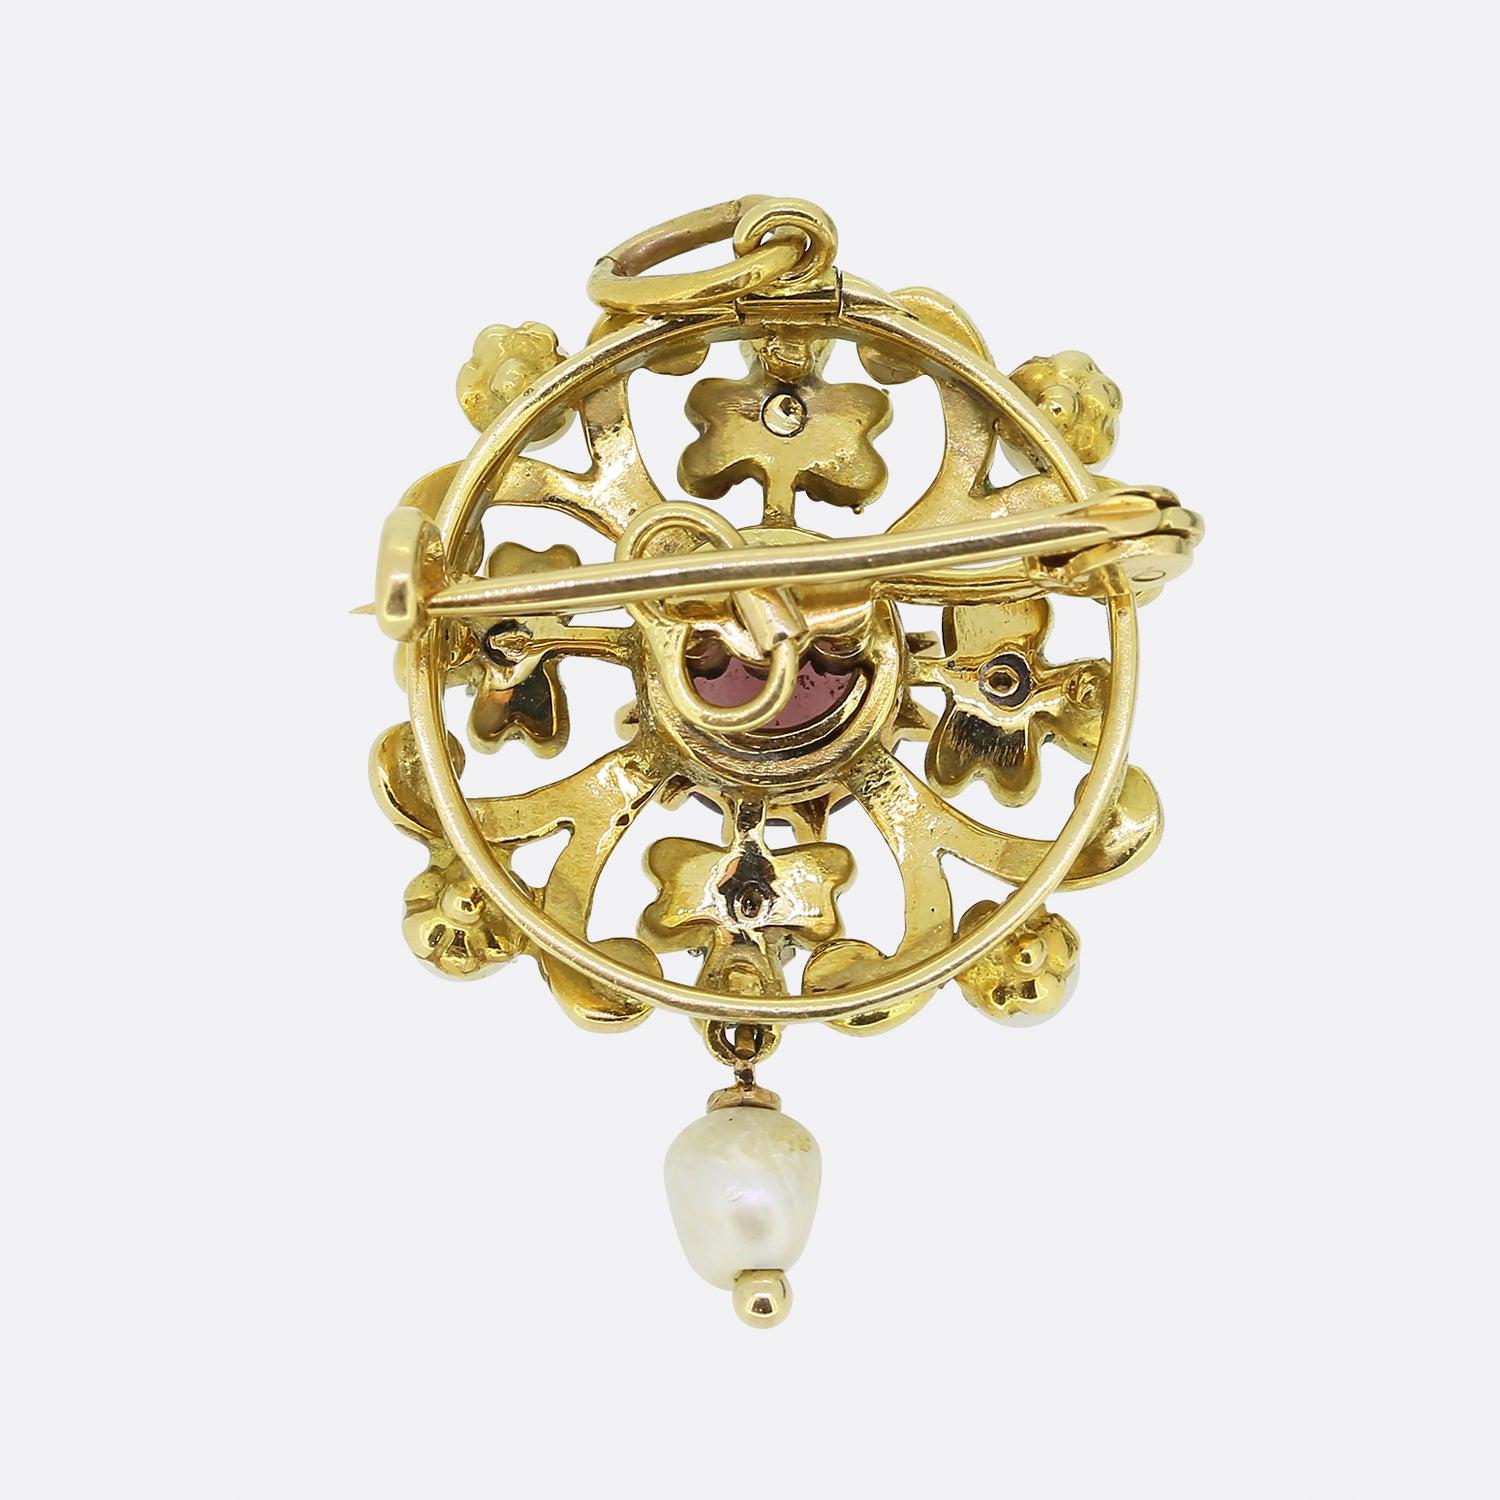 This is a truly wonderful Art Nouveau style 18ct yellow gold natural pearl, amethyst, diamond and enamel pendant. The highly decorated, iconic Art Nouveau frame has a floriated design, composed of beautifully enamelled leaves. The enamel is in